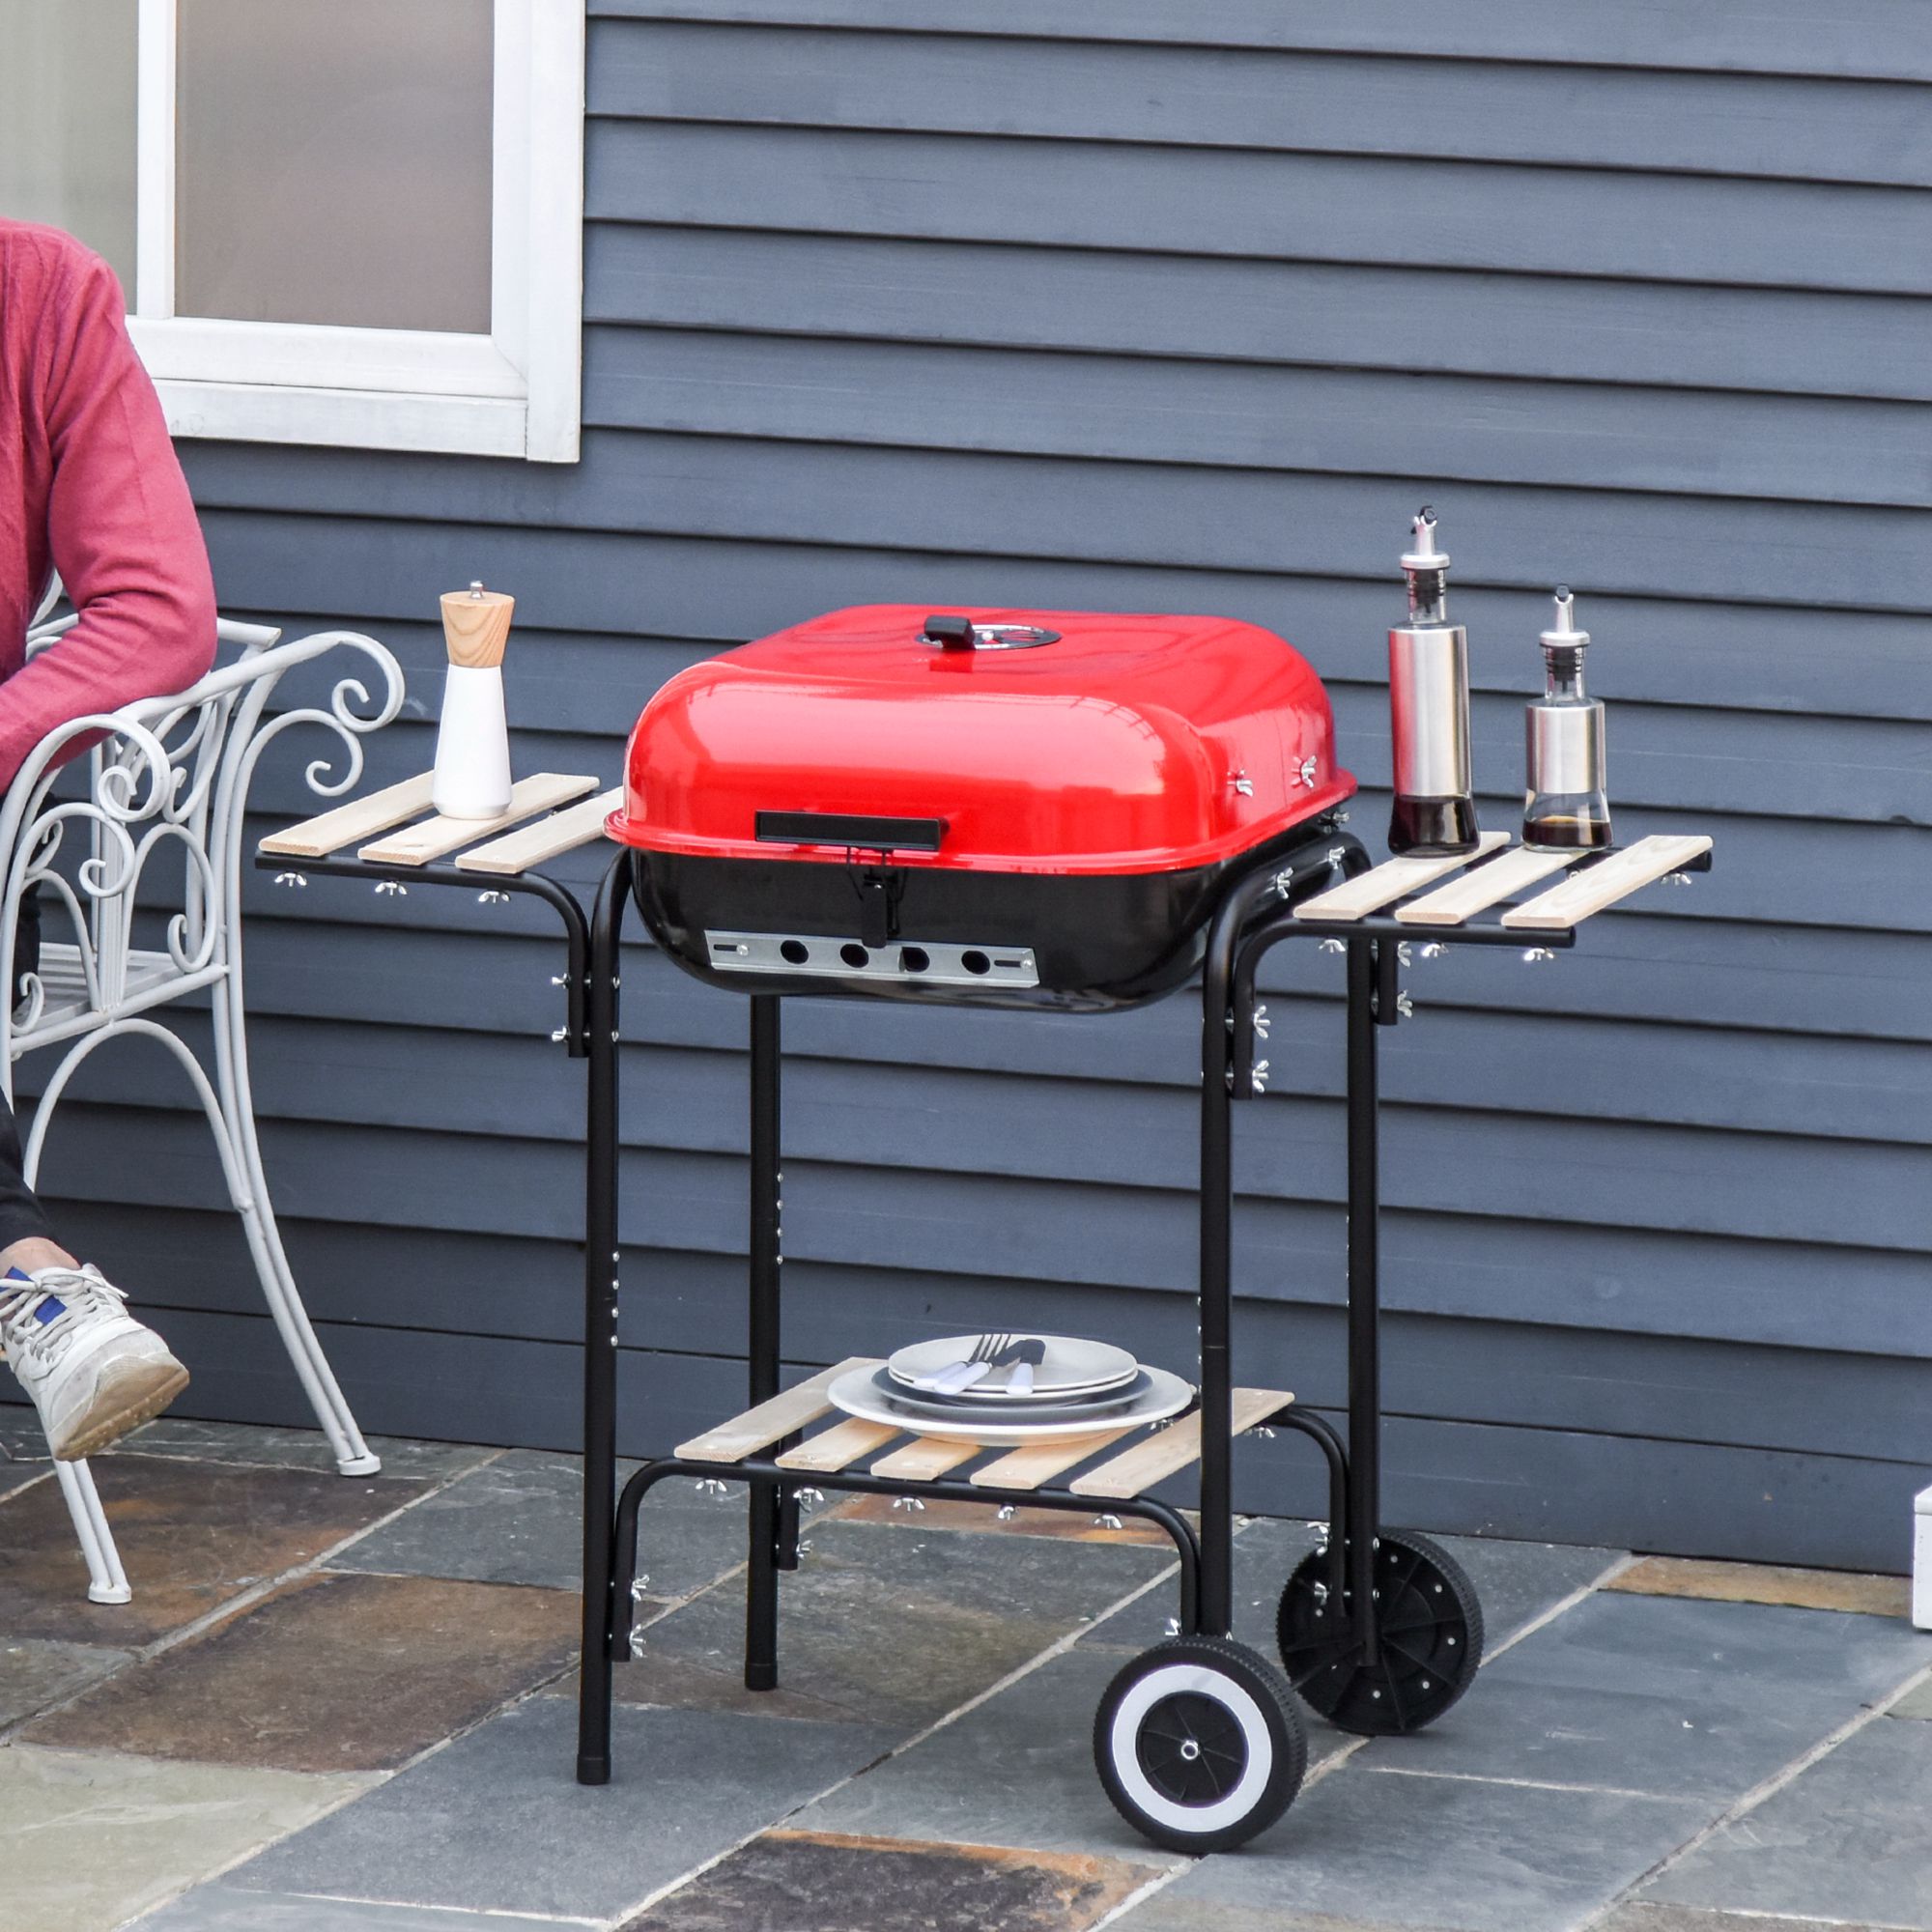 Red Charcoal Grill from Aosom.com